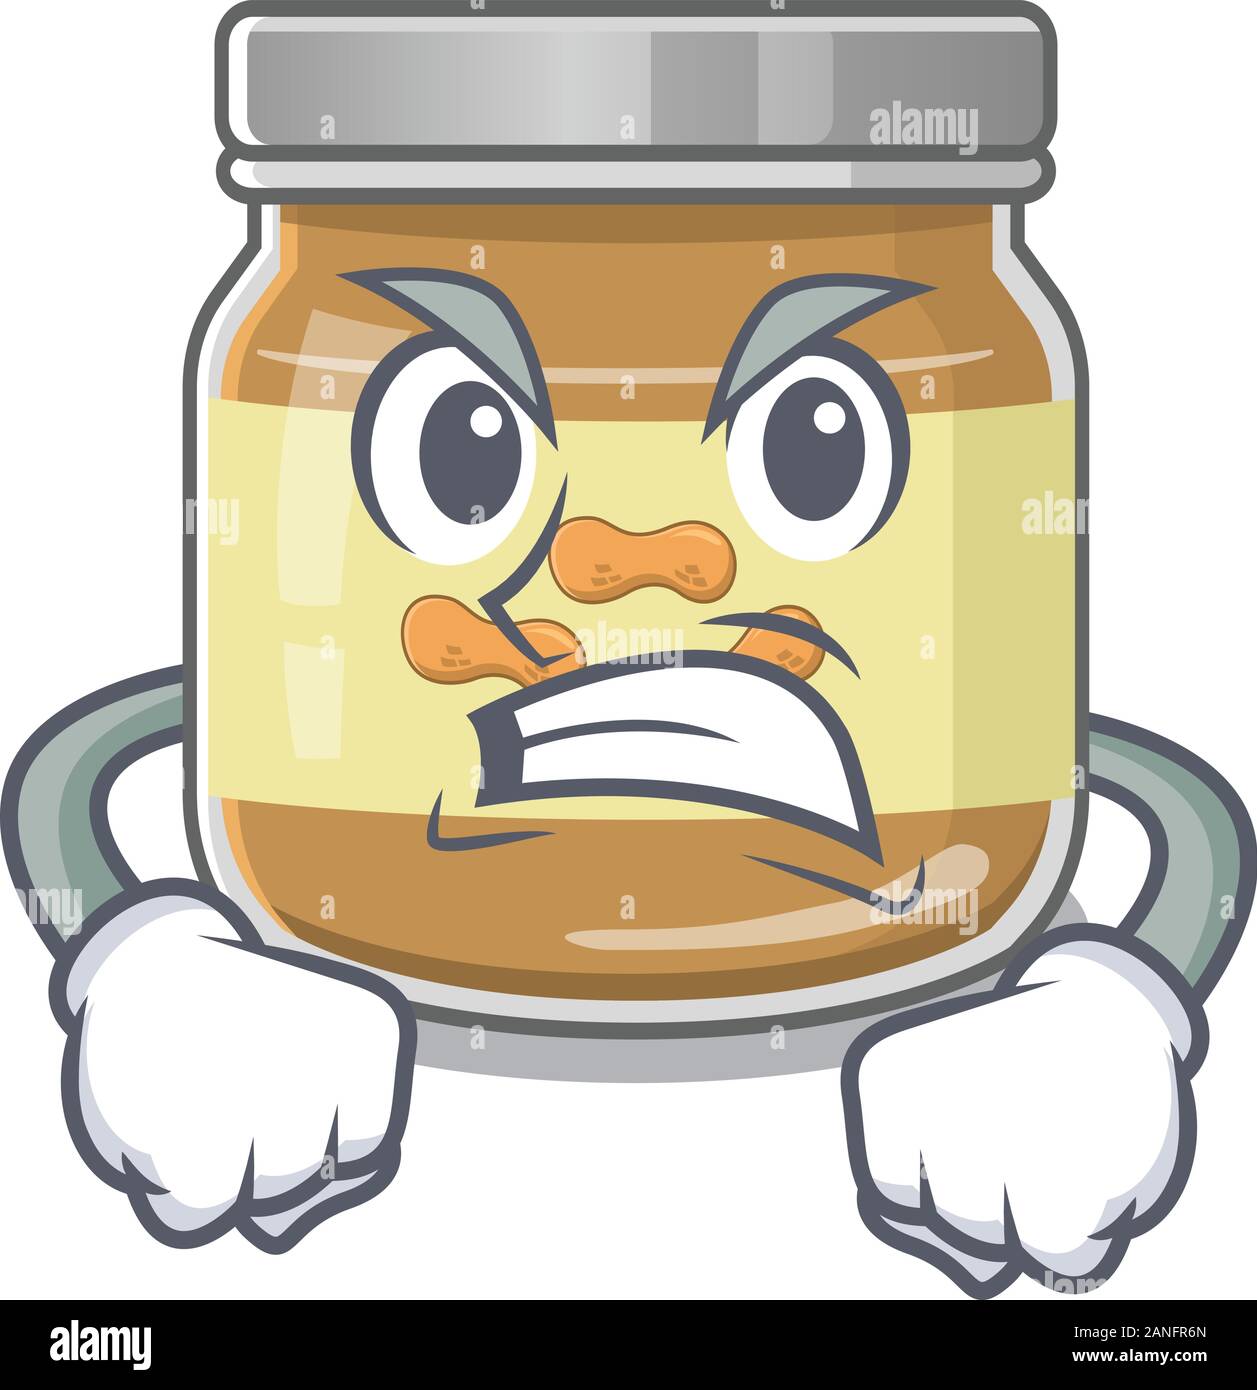 Peanut butter cartoon character design having angry face Stock Vector Image  & Art - Alamy